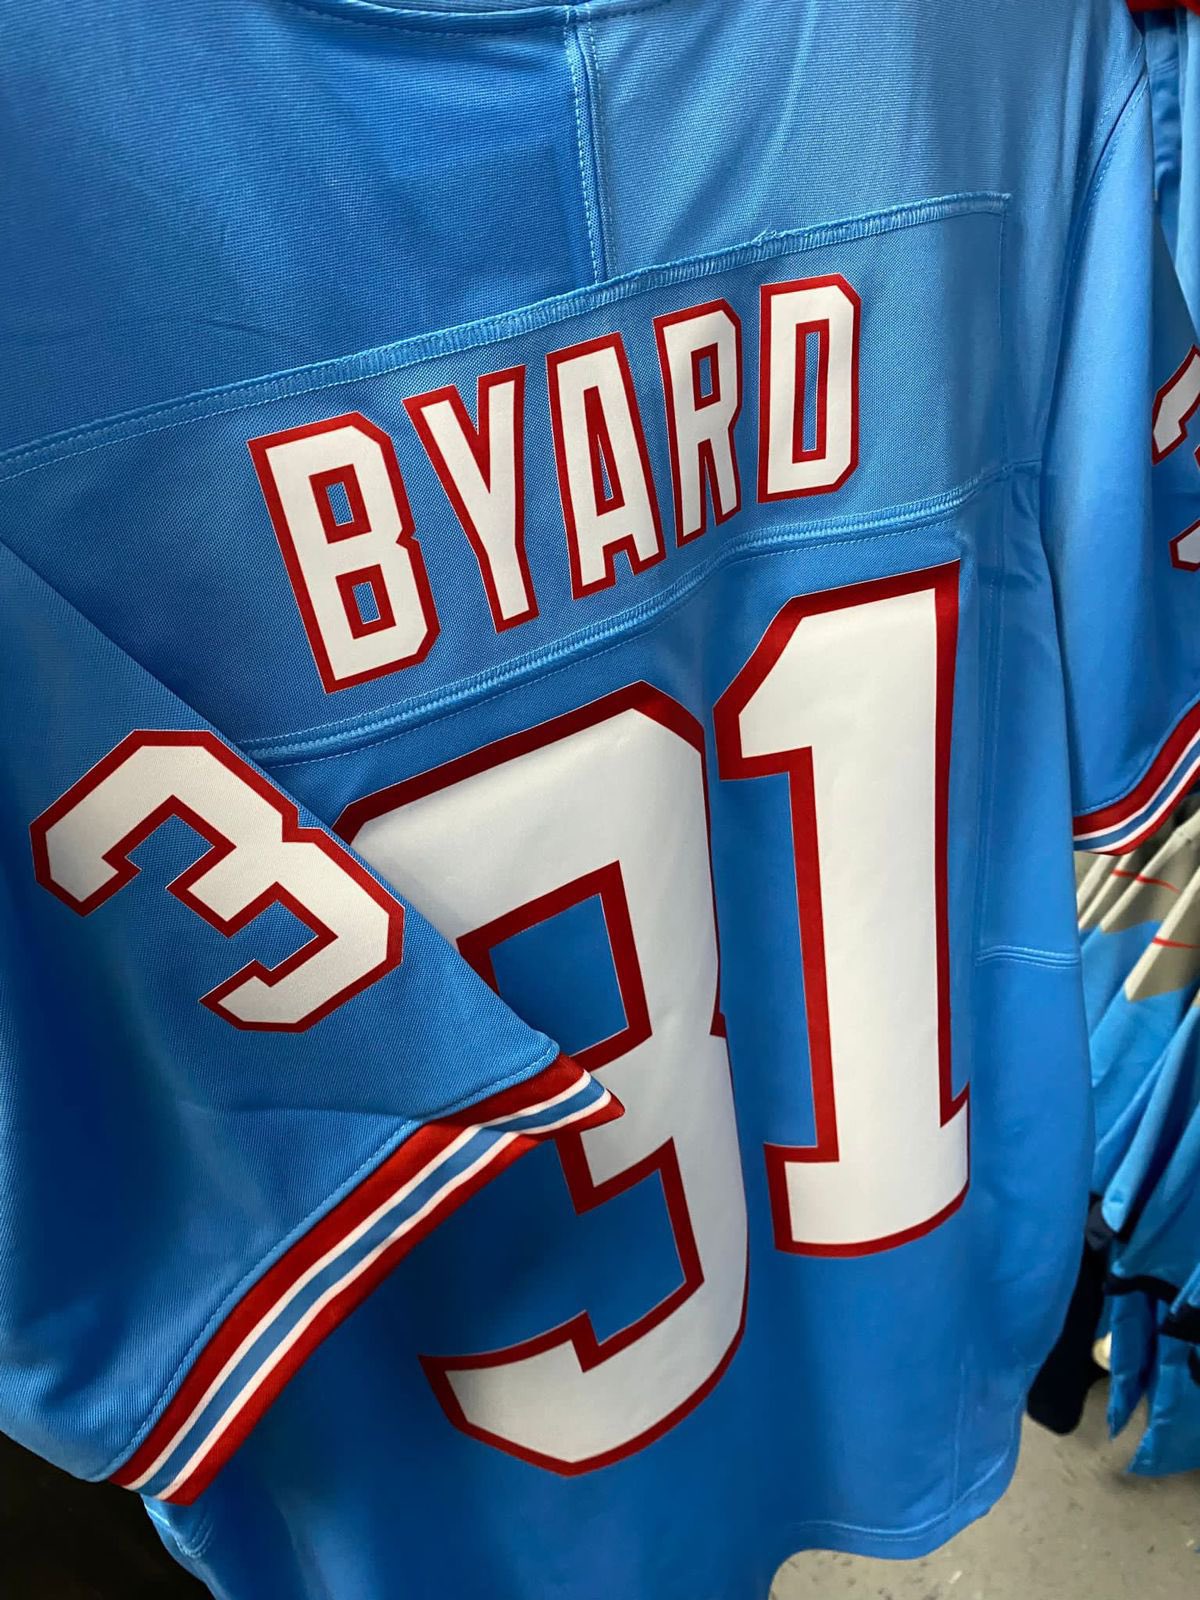 Titans: Houston Oilers throwback jerseys have leaked; see photos